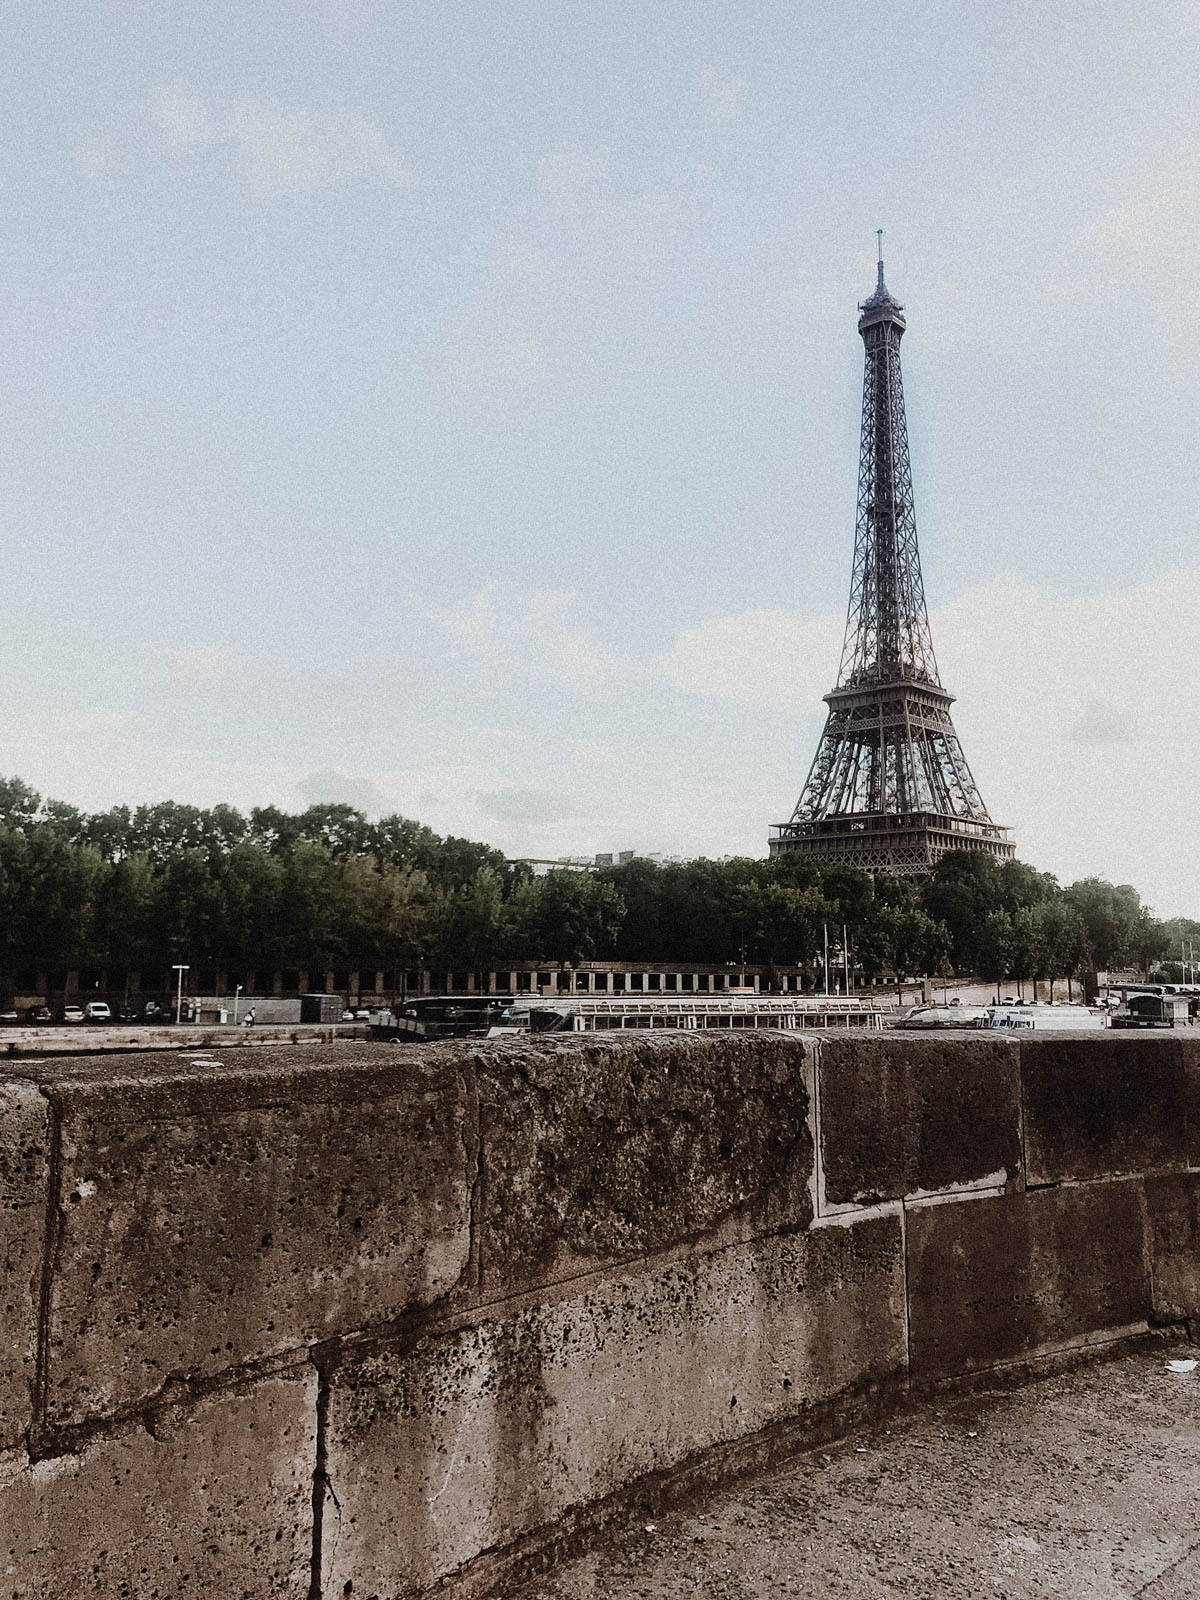 Paris France Travel Guide - Eiffel Tower, European Architecture and Buildings / RG Daily Blog